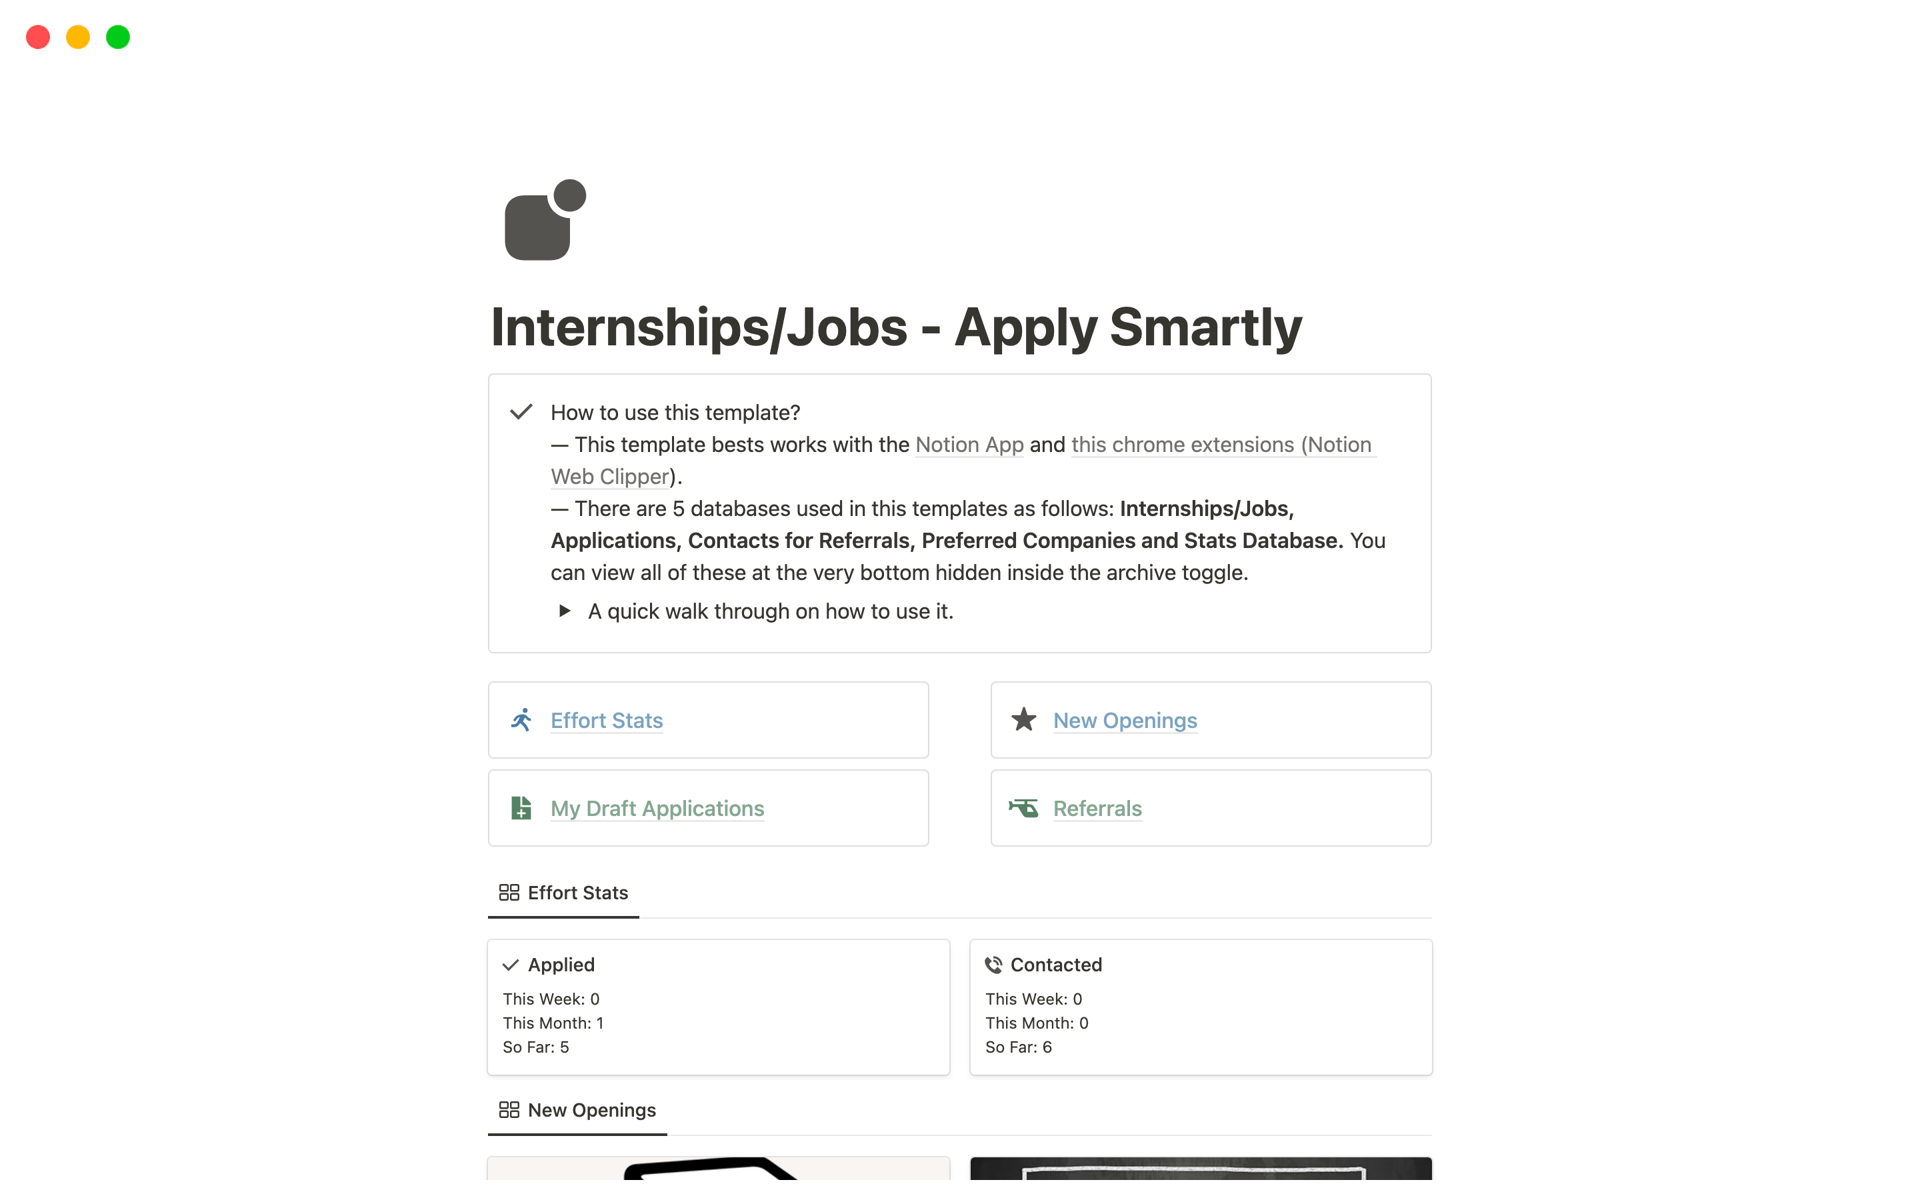 This template helps you apply smartly for internships and jobs by organizing your applications, referrals, and preferred companies in one place. You can easily save new openings from any browser using the Notion app and the Notion Web Clipper extension. 